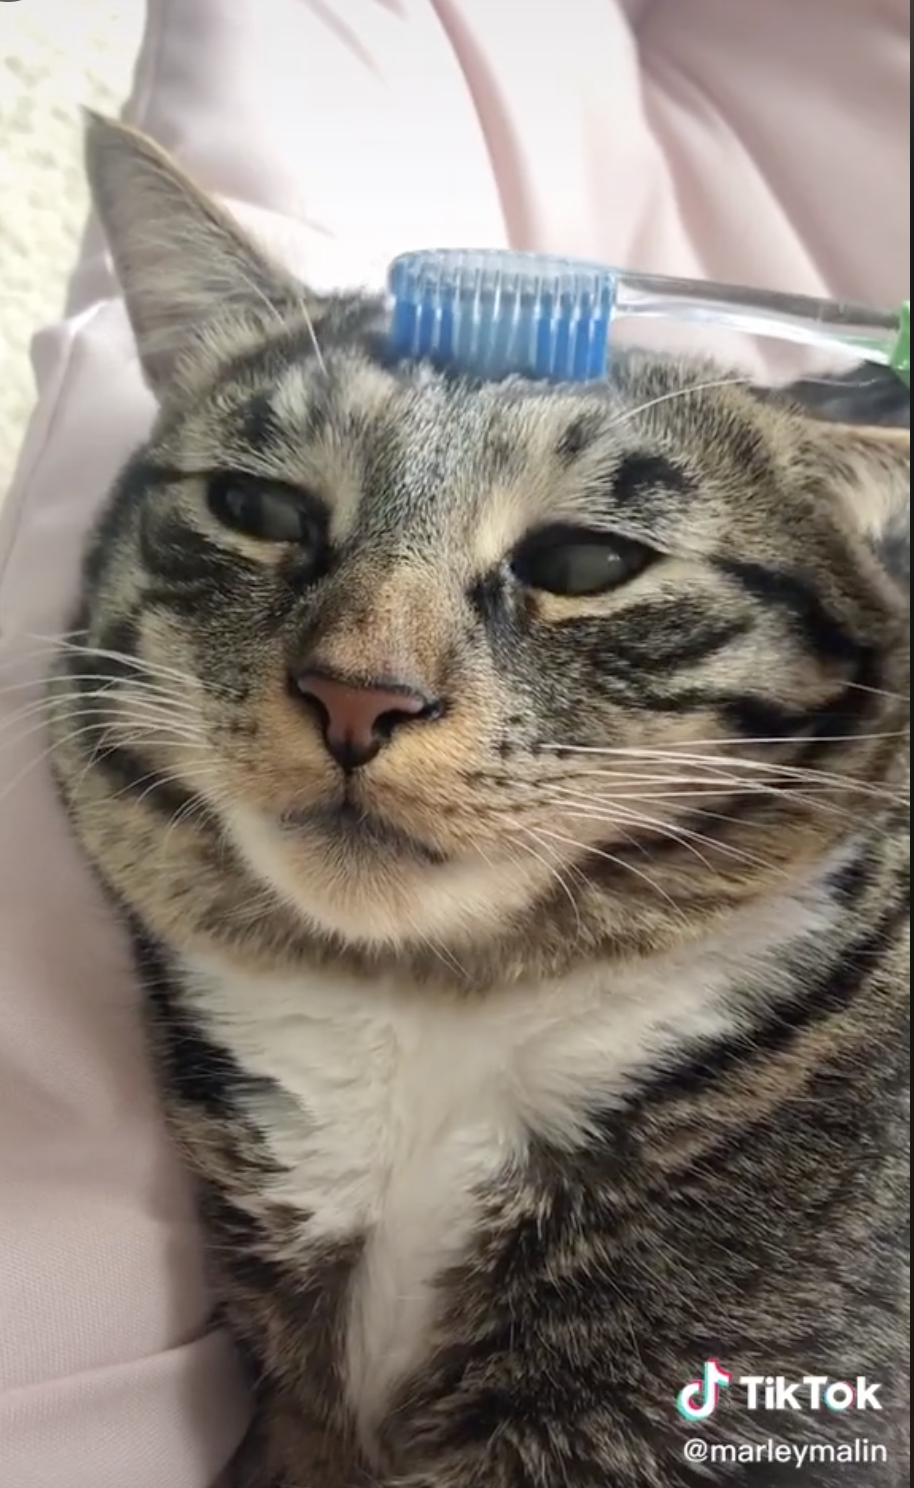 Does Brushing Your Cat With a Wet Toothbrush?